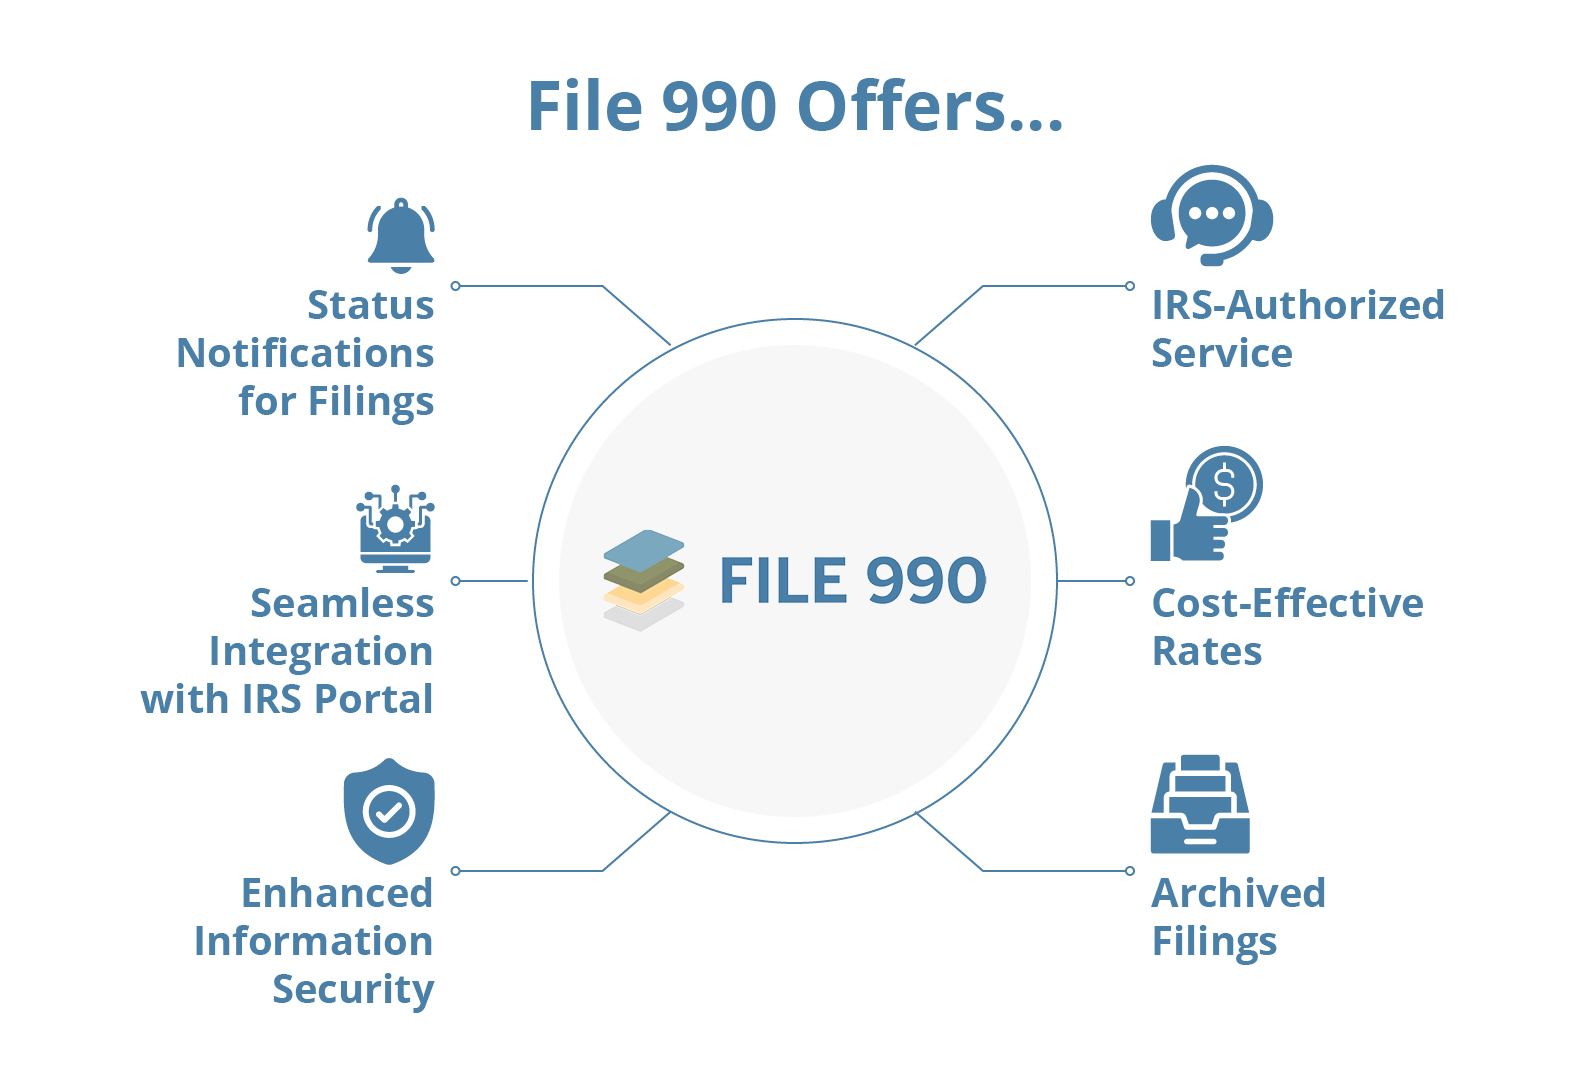 Some of File 990’s features, which can help you file the Form 990N postcard